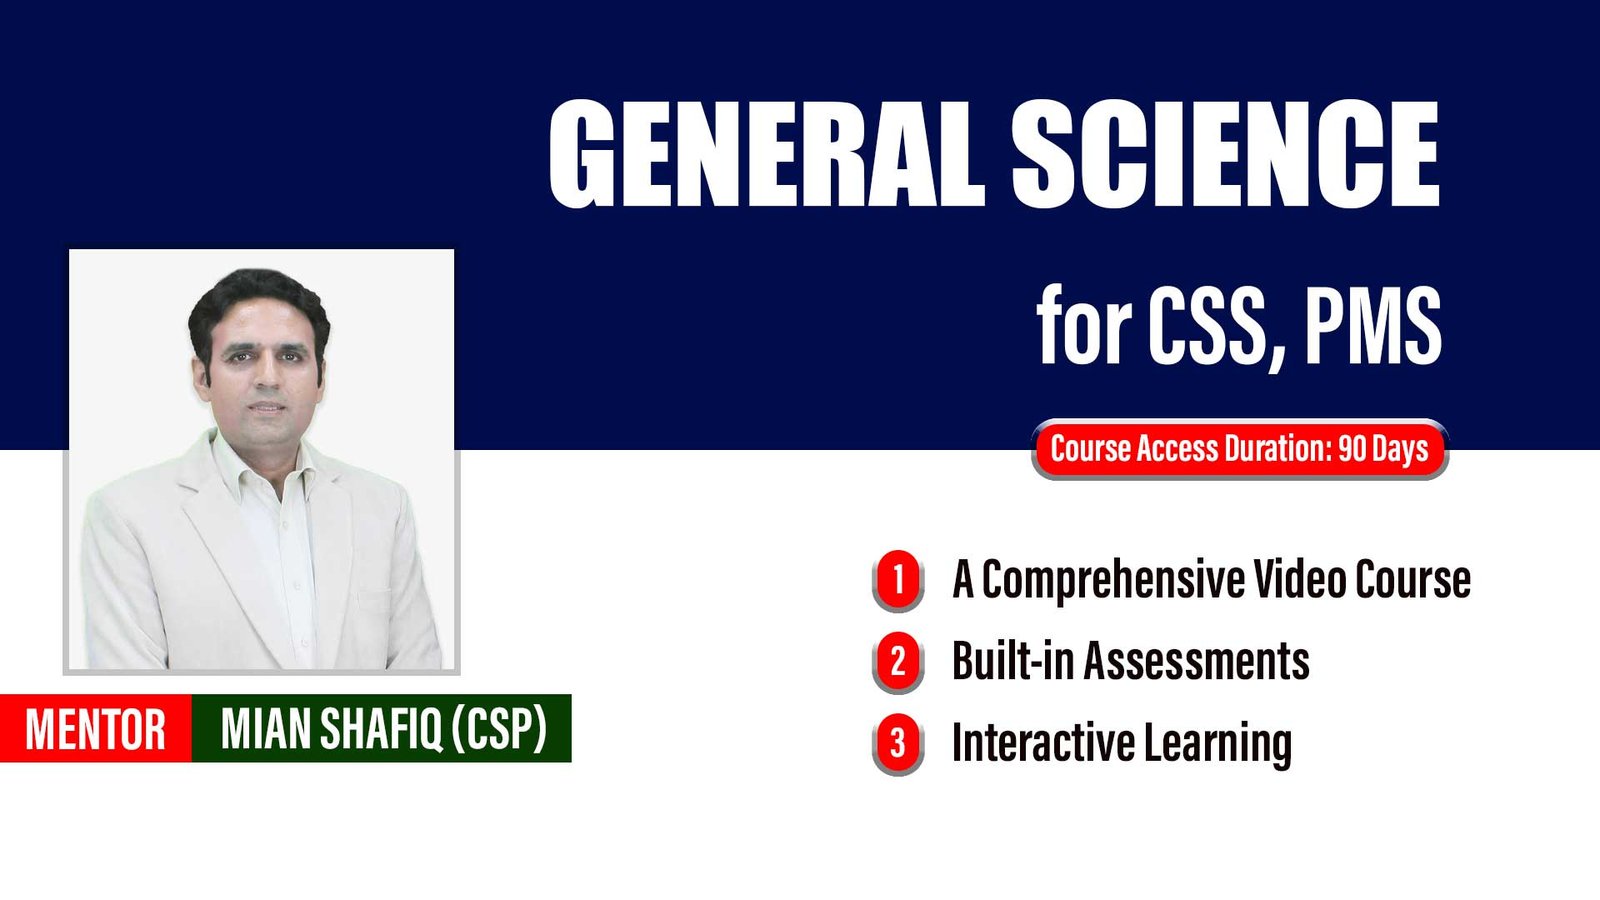 General Science for CSS, PMS LMS Course by Mian Shafiq